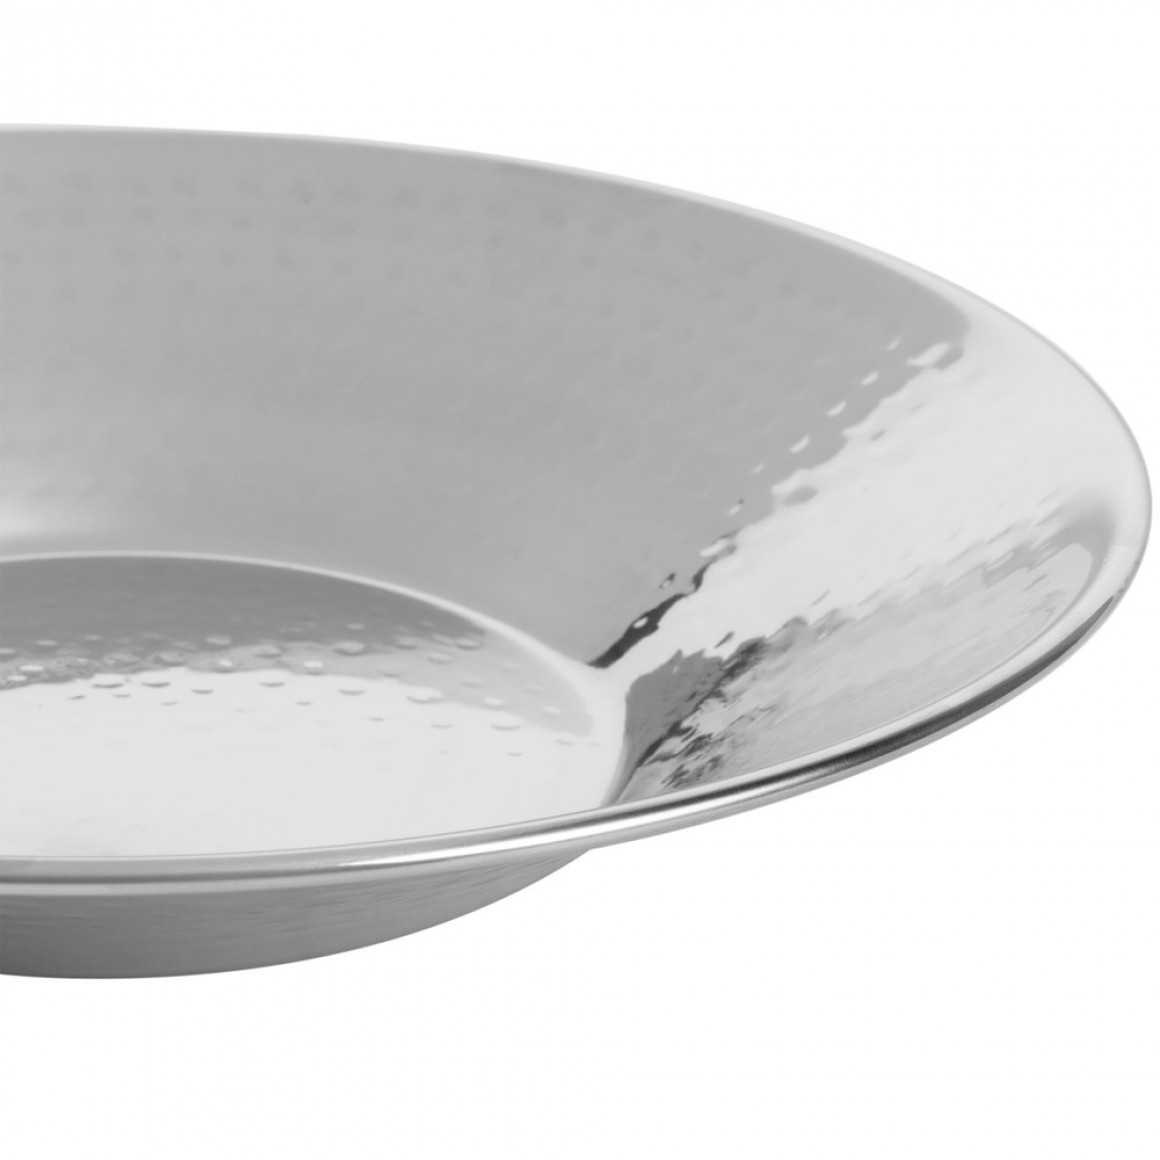 STAINLESS STEEL, HAMMERED BOWL, ROUND, 85 OZ.